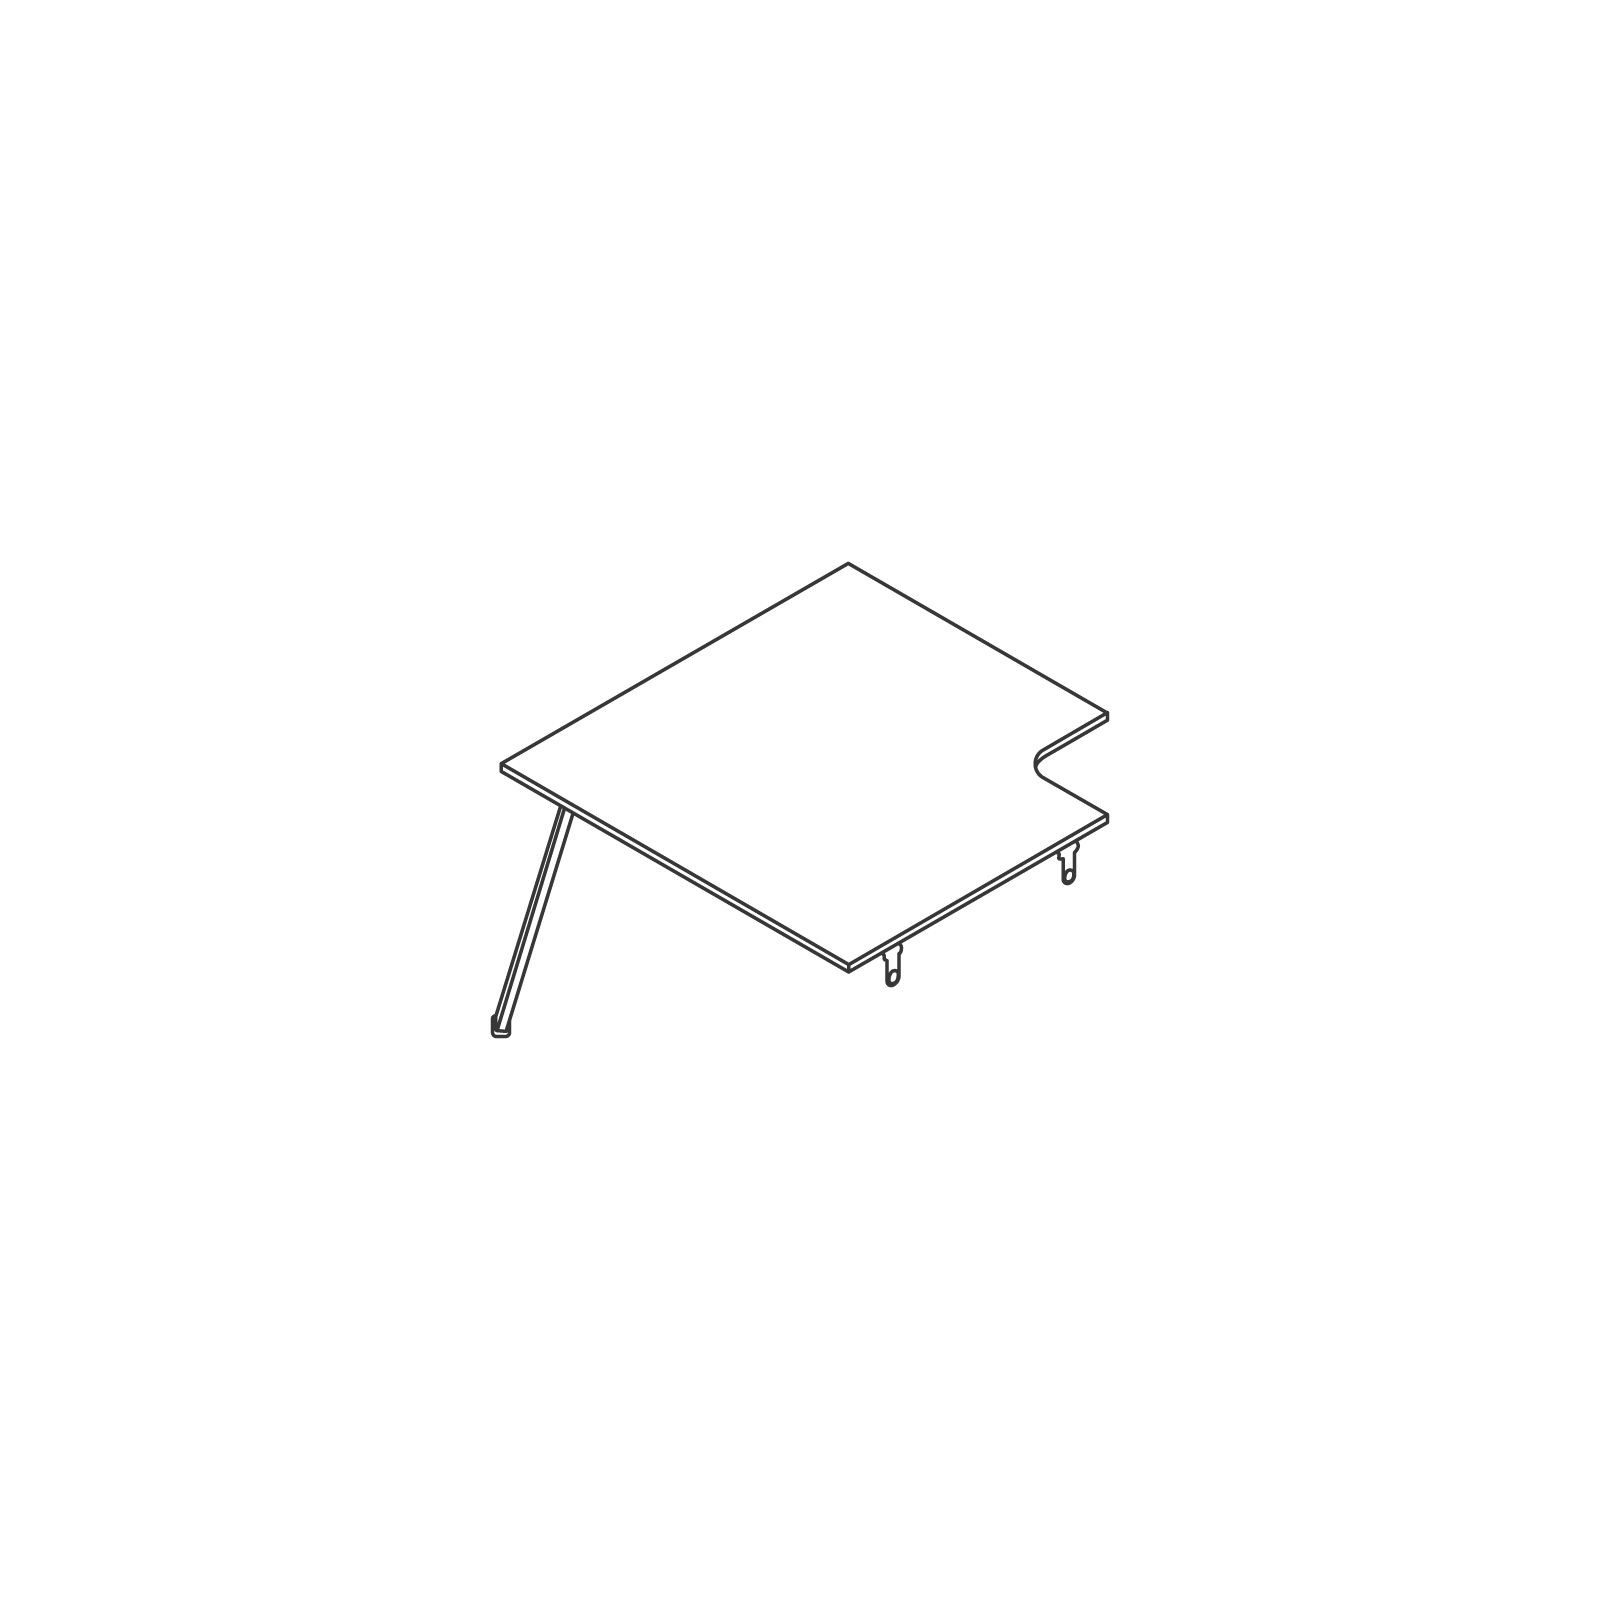 A line drawing - Nemschoff Easton Multiple Seating–Spanner Corner Table